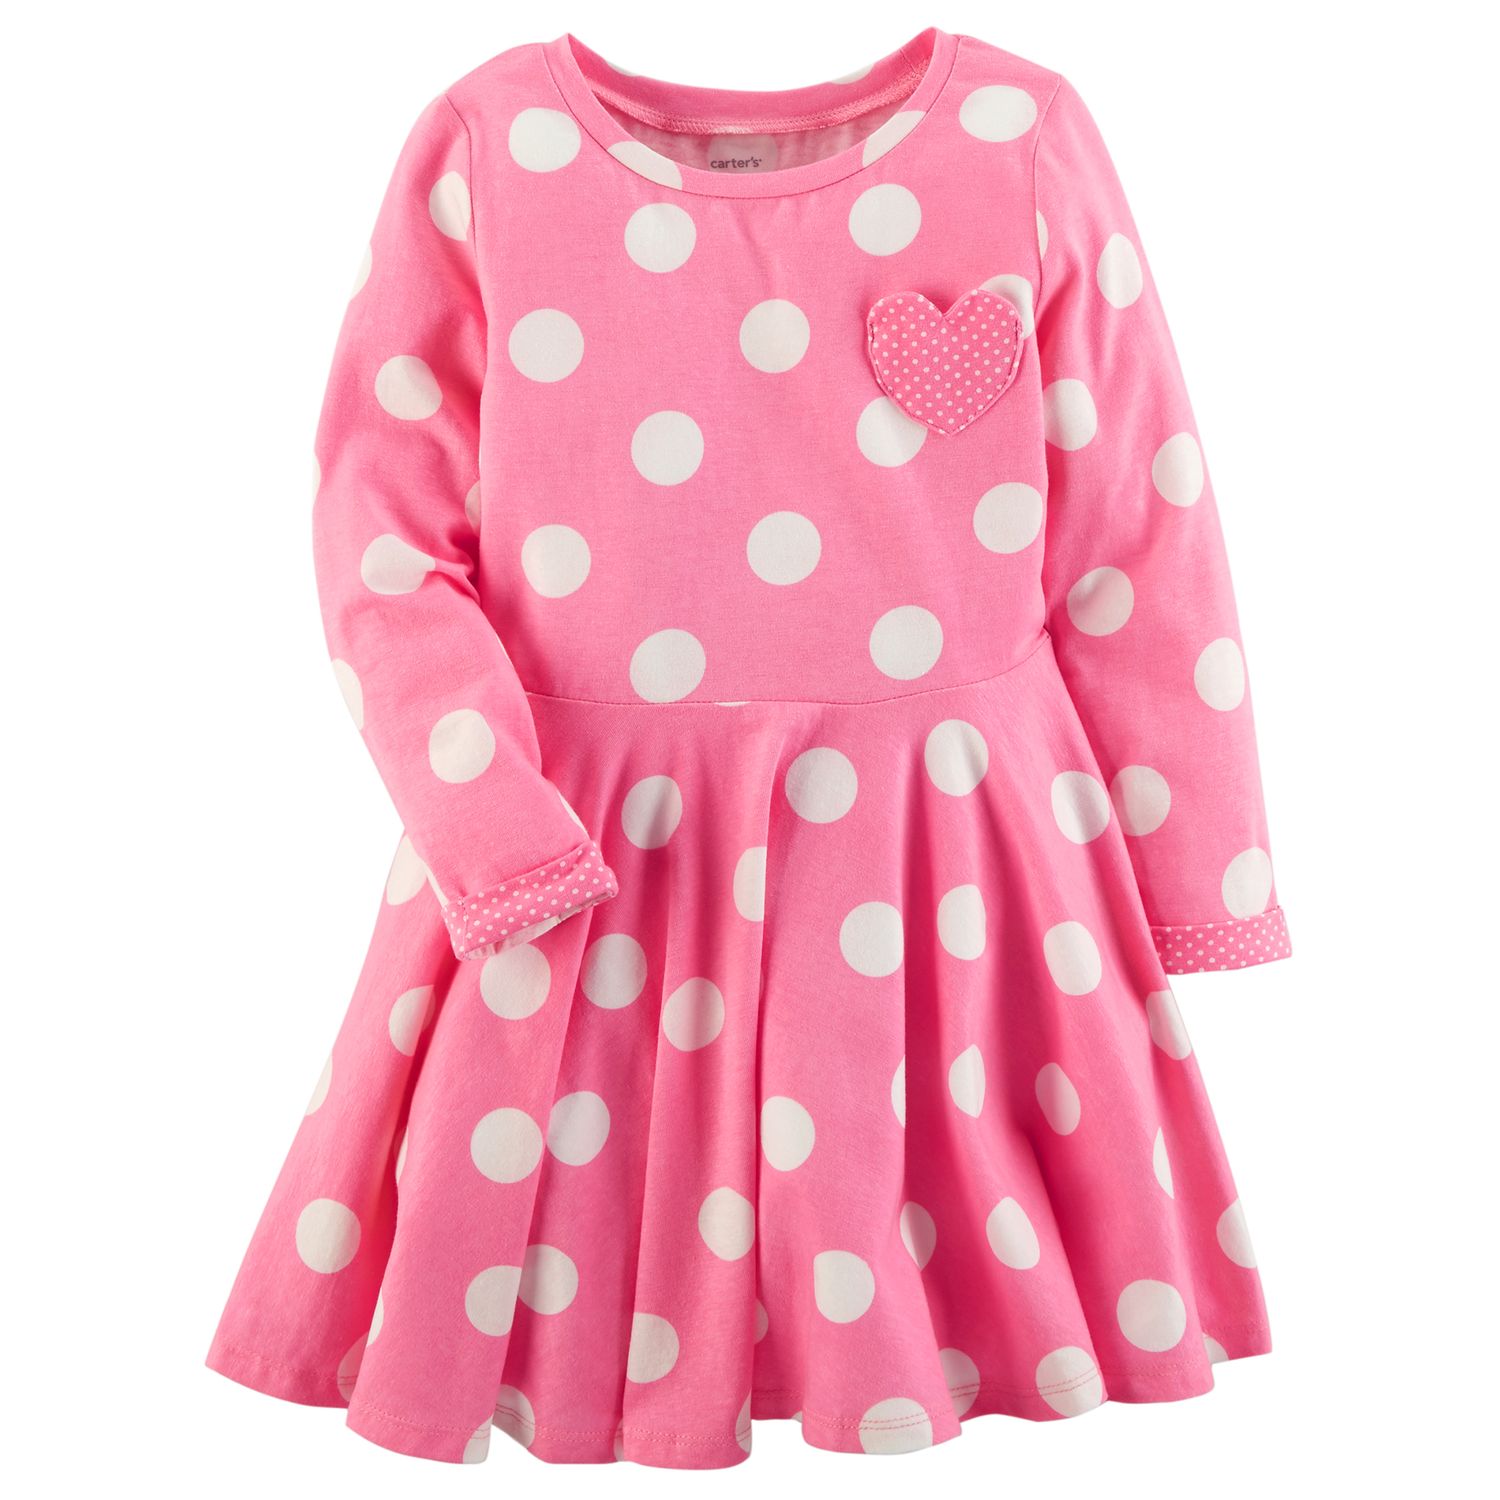 pink dress with white polka dots